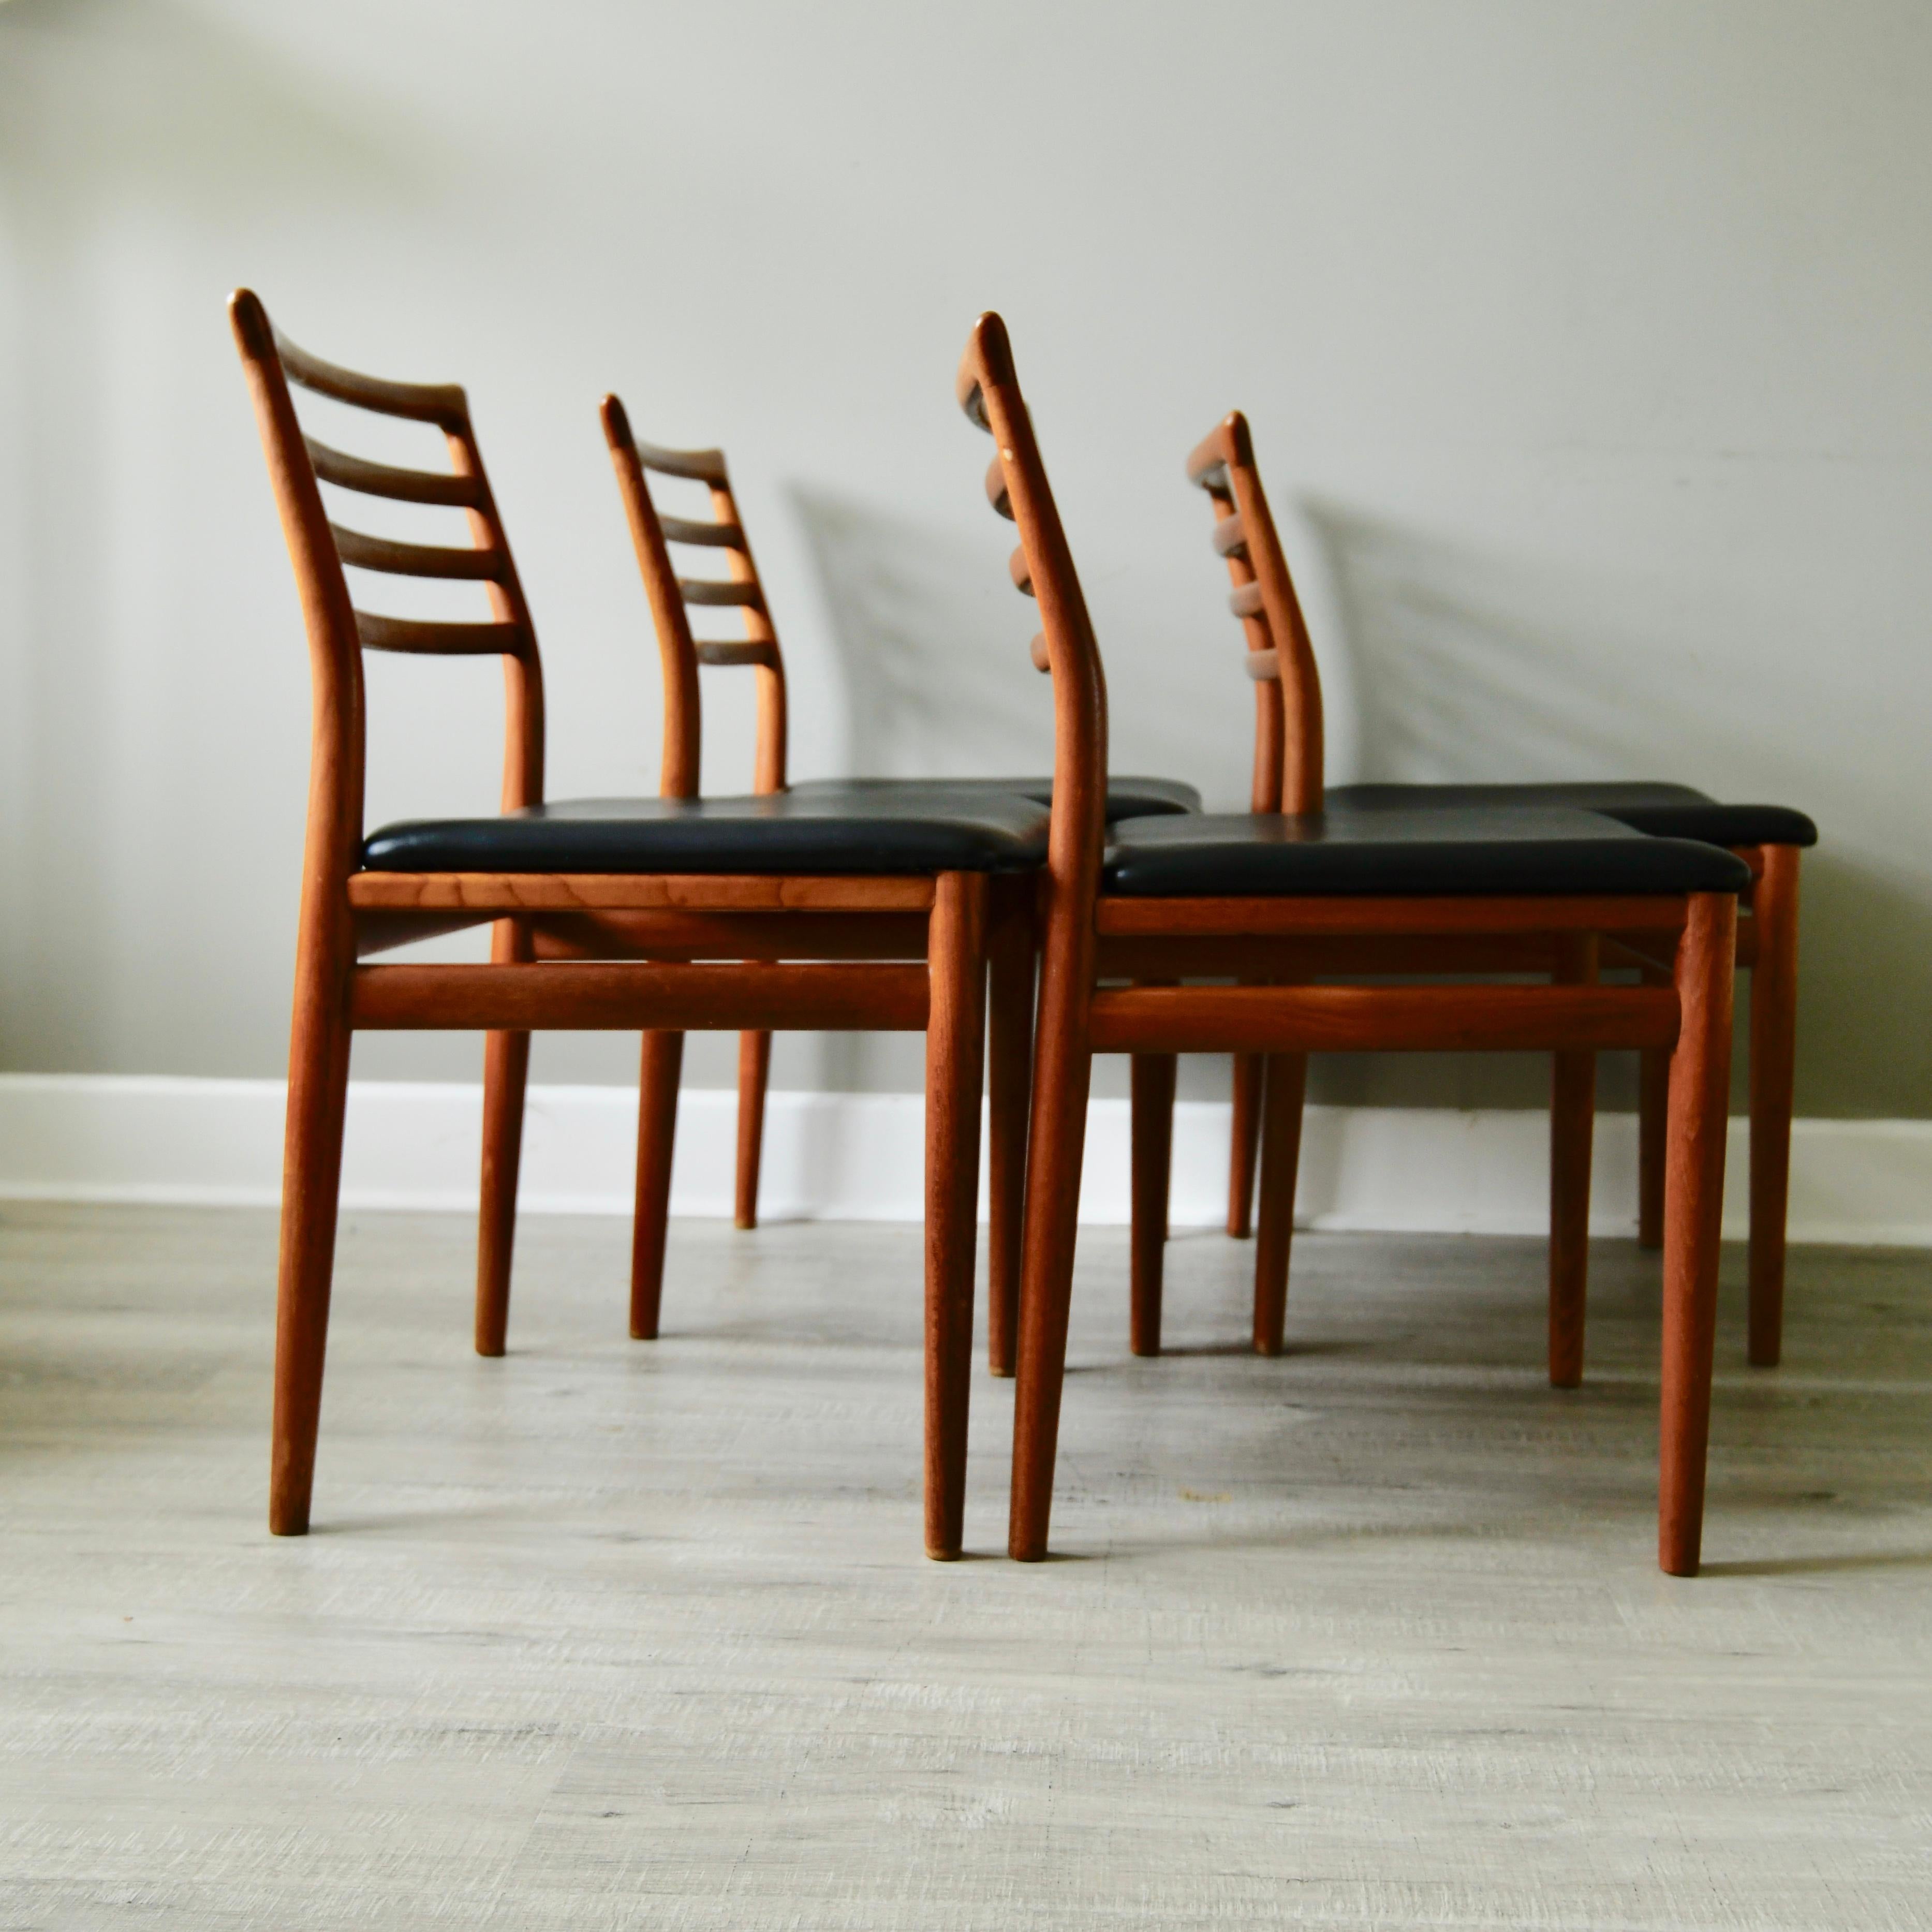 Set of four teak Scandinavian dining chairs with original black leatherette seats by Erling Torvits for Soro Stolefabrik from the 1970s.